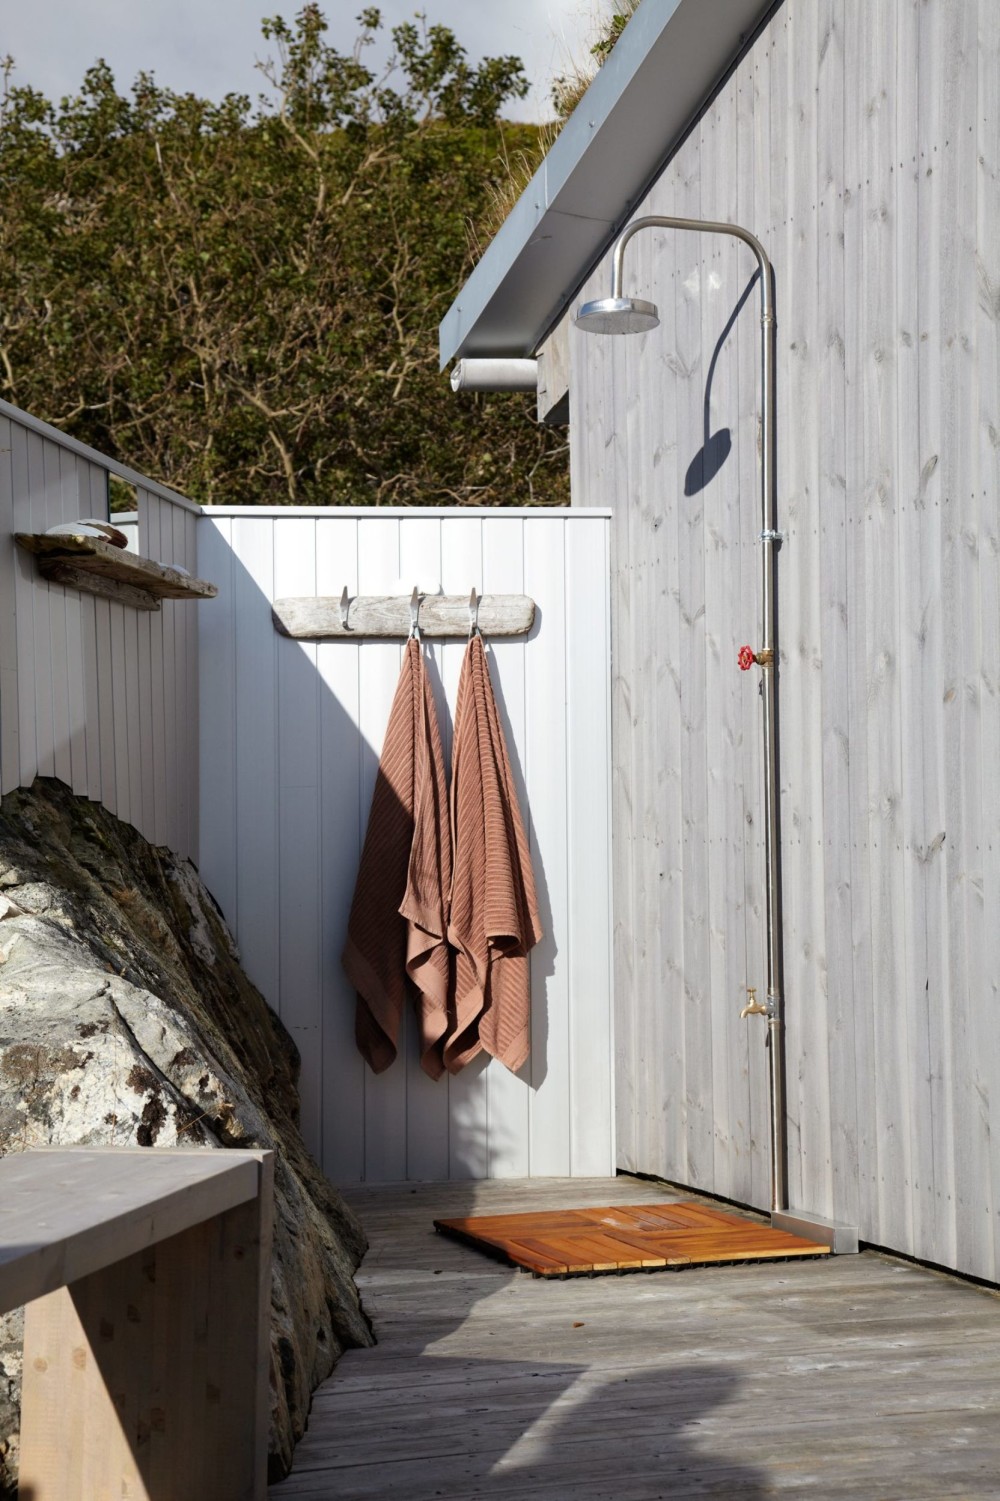 Another simple solution, this outdoor shower has a spicket for the days you need to rinse off after a mow or a walkabout in bare feet, as well as a shower for the days you get a bit dirtier. #backyard inspiration via www.L-2-Design.com